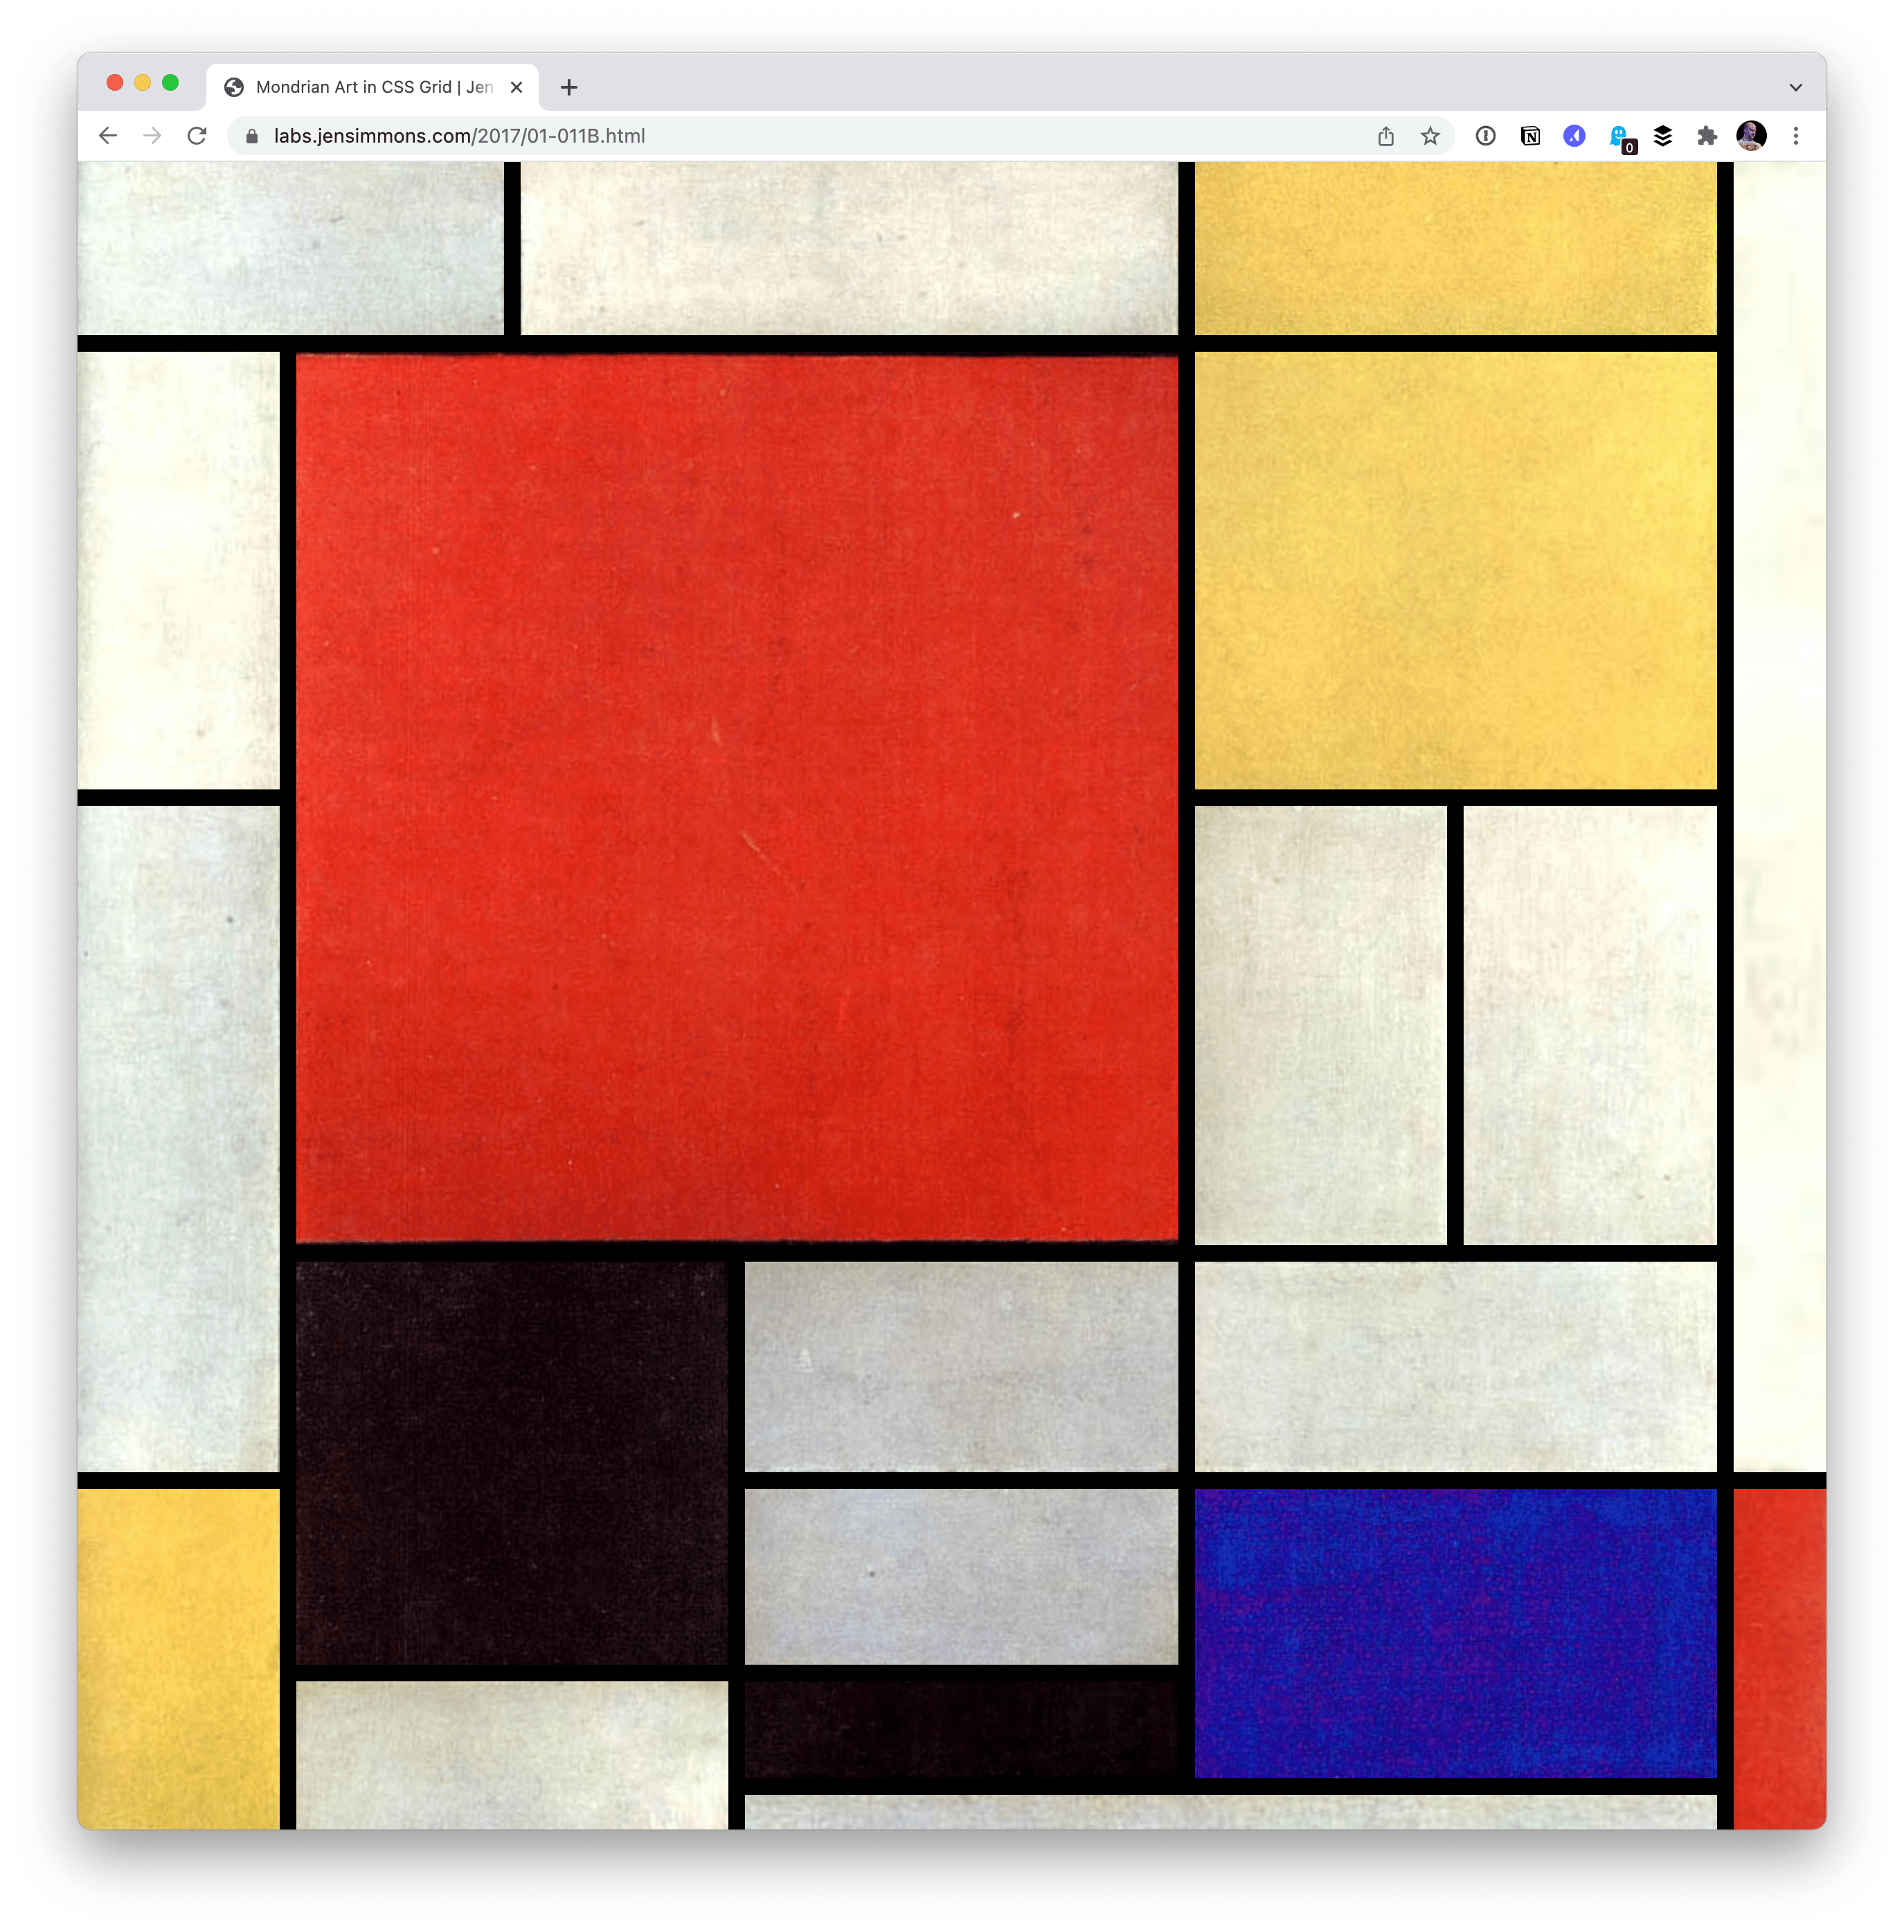 Mondrian Art in CSS Grid from Jen Simmons. Includes rough grungy texture across the entire piece.